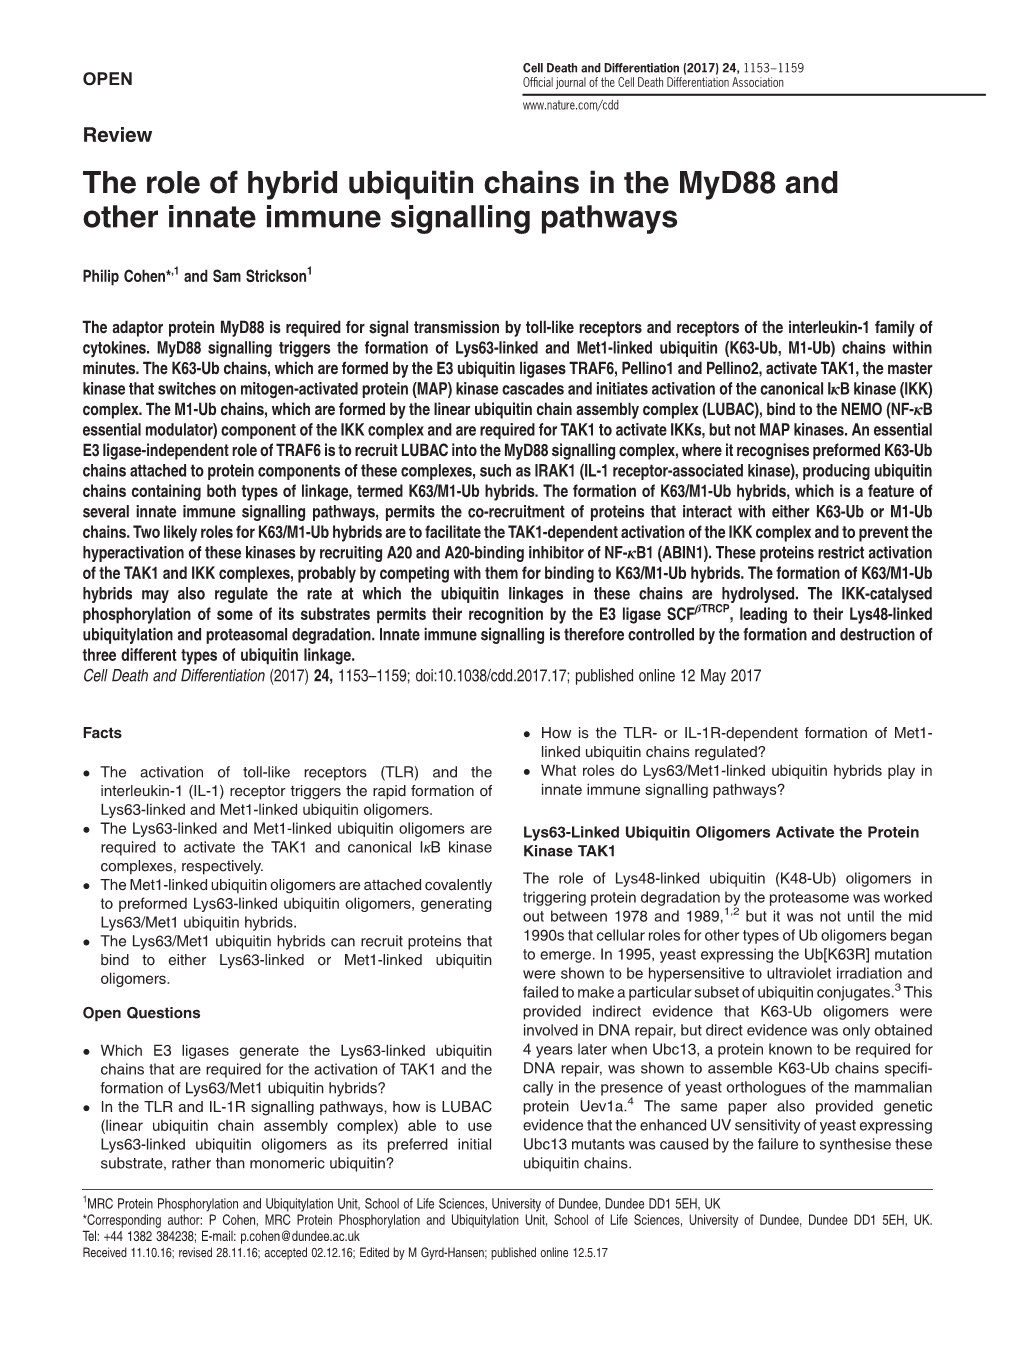 The Role of Hybrid Ubiquitin Chains in the Myd88 and Other Innate Immune Signalling Pathways